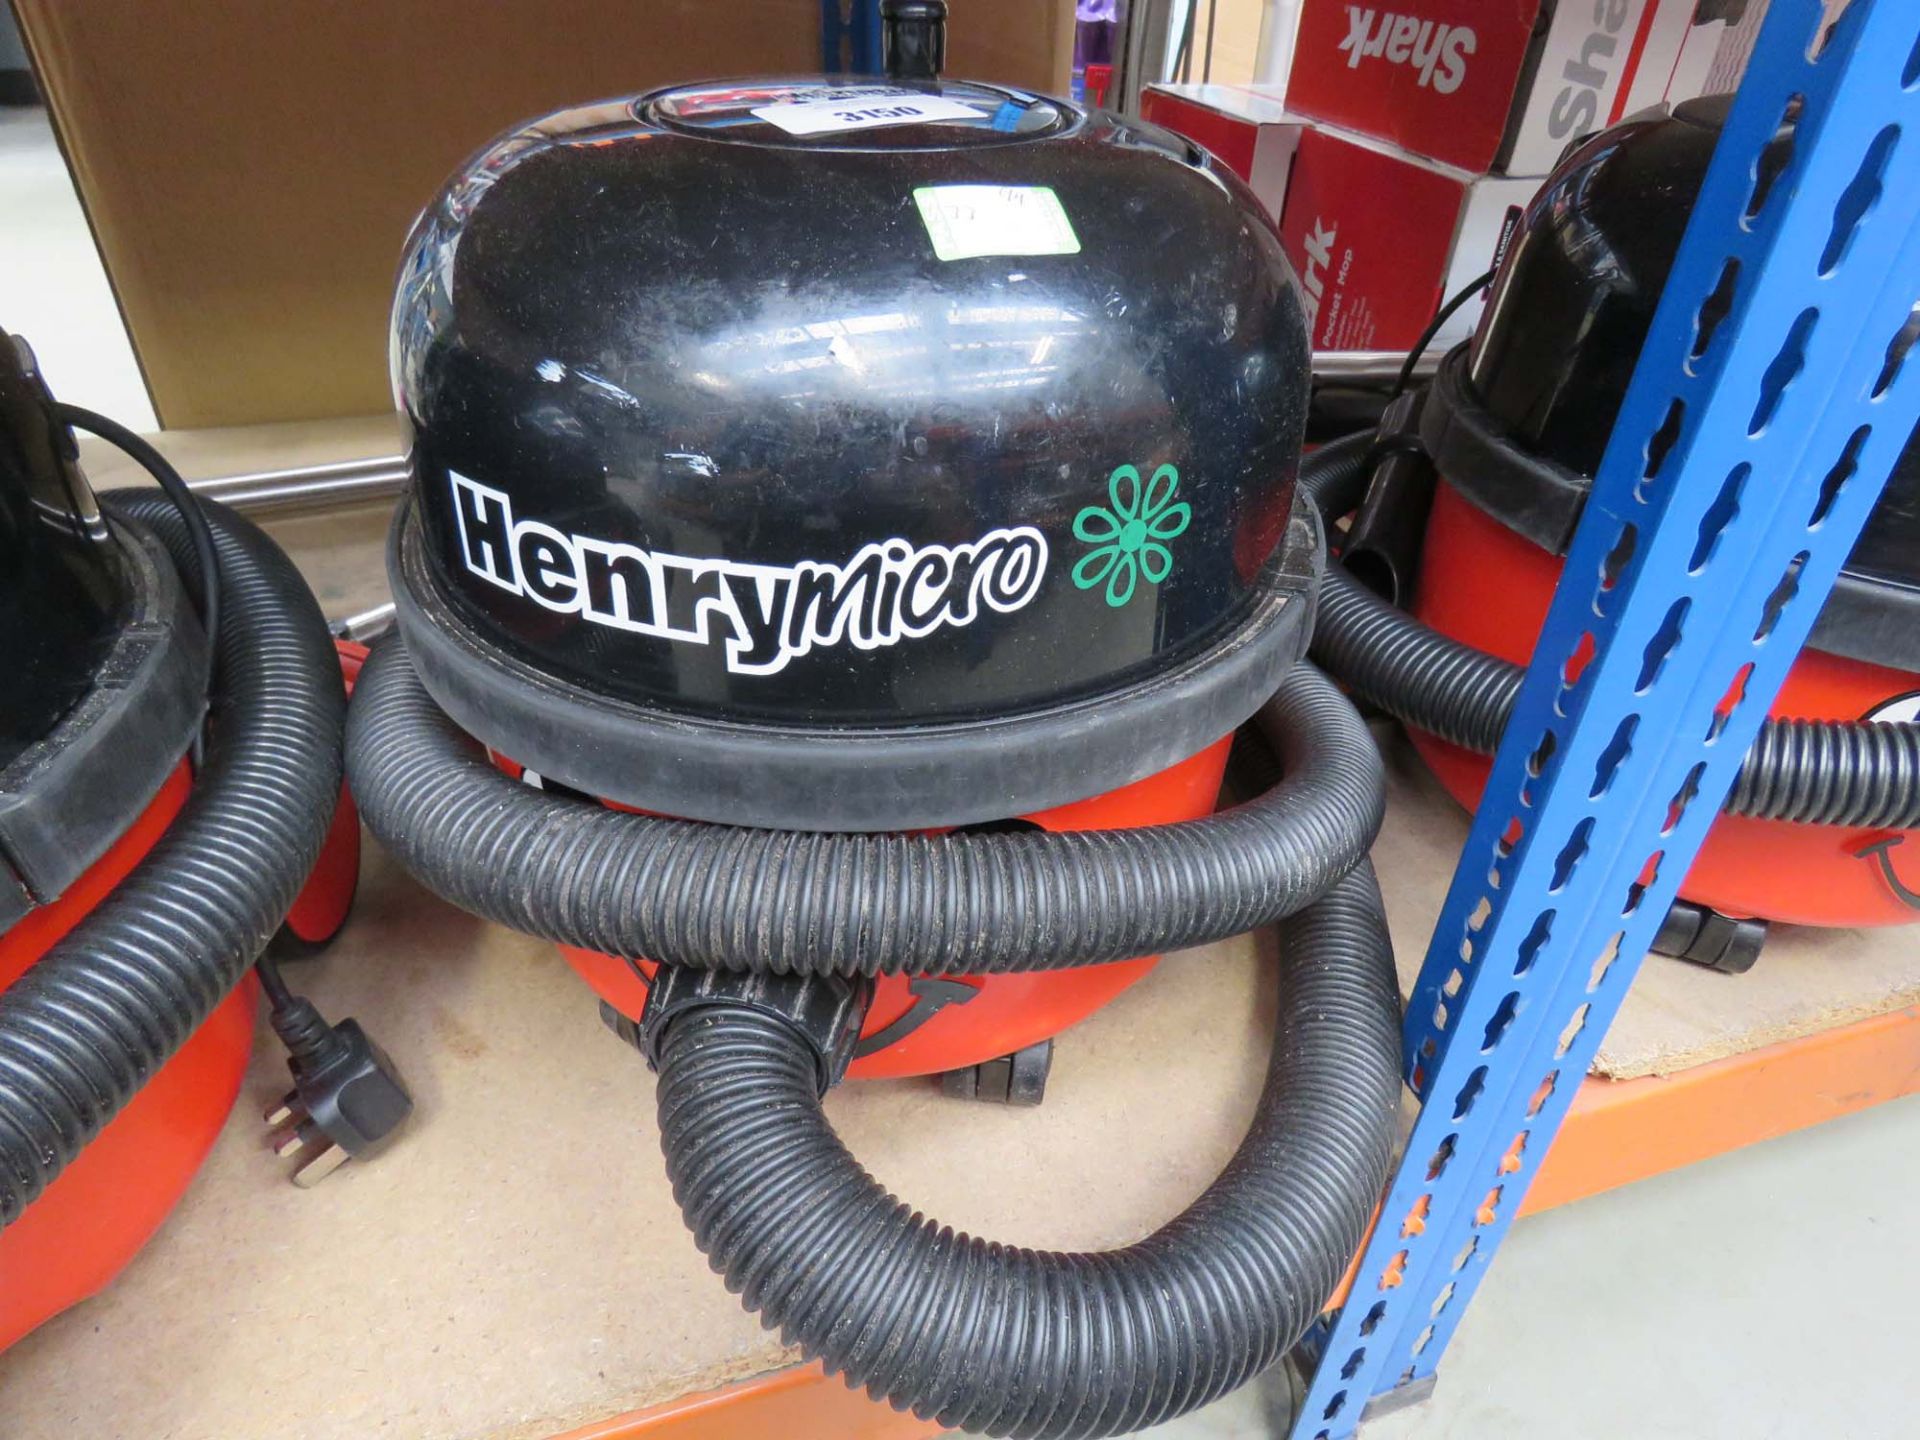 Henry micro vacuum cleaner, no pole